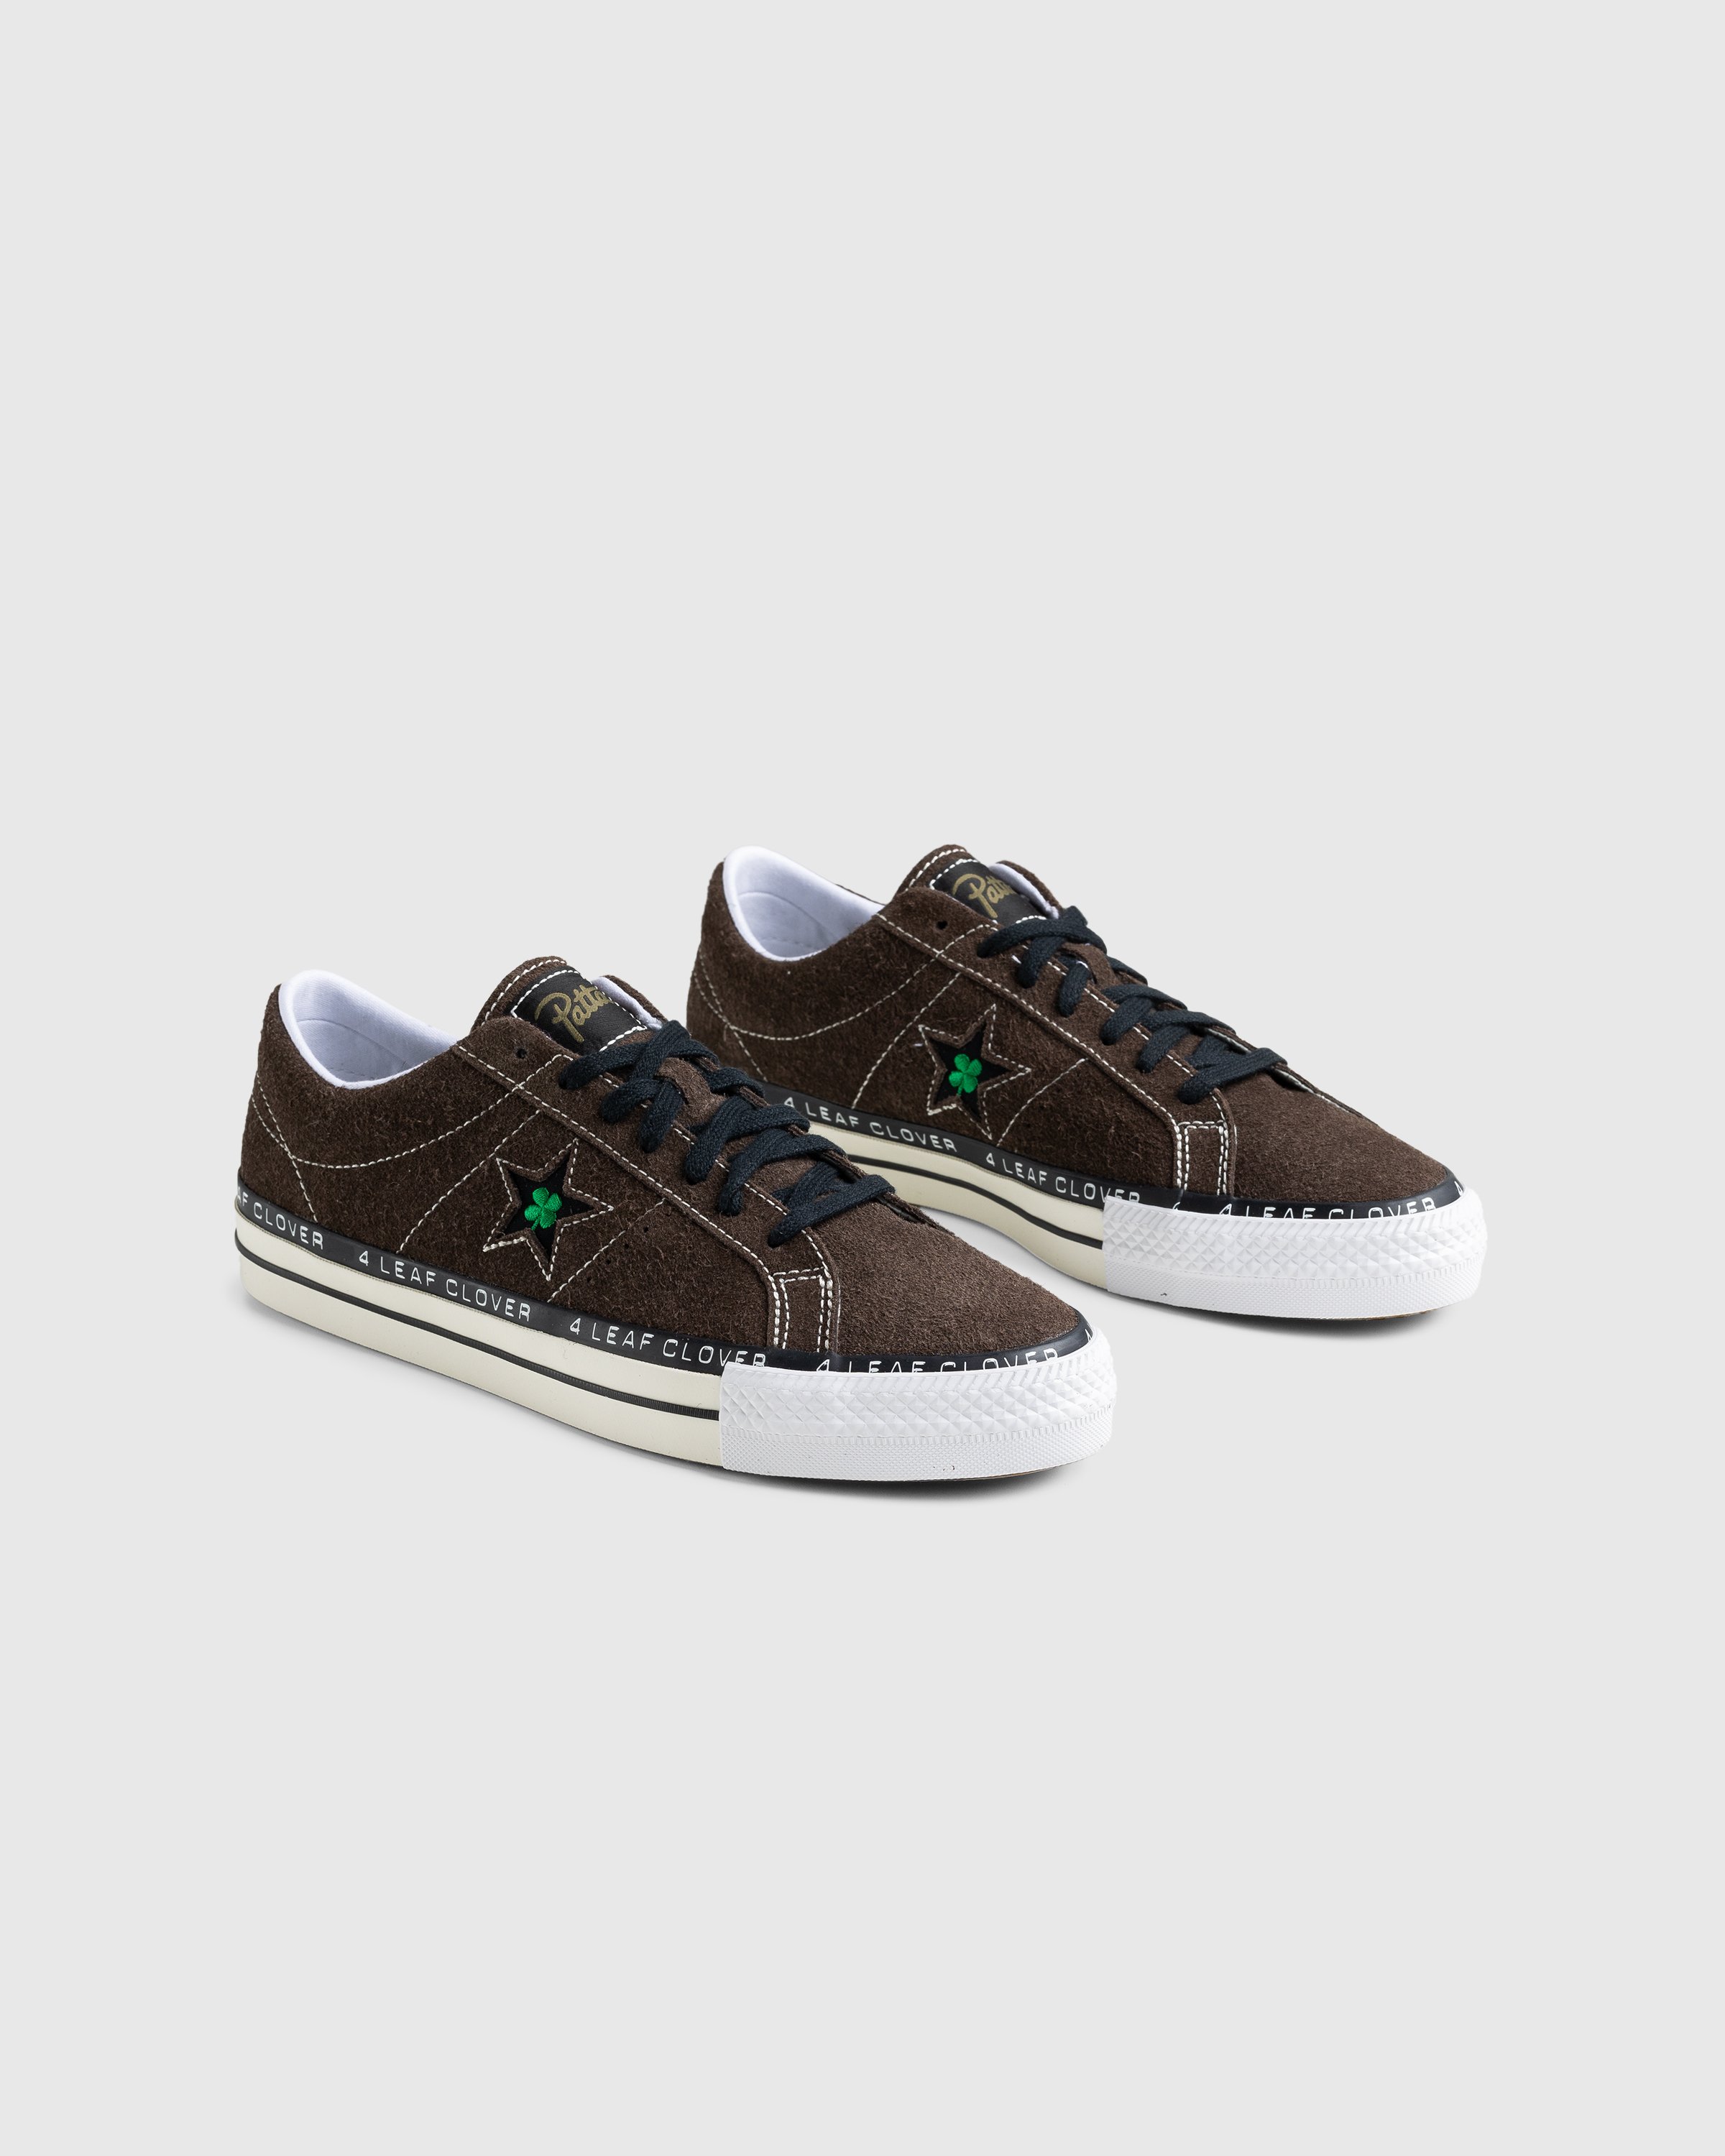 Patta x Converse - “Four Leaf Clover” One Star Pro - Footwear - Brown - Image 3